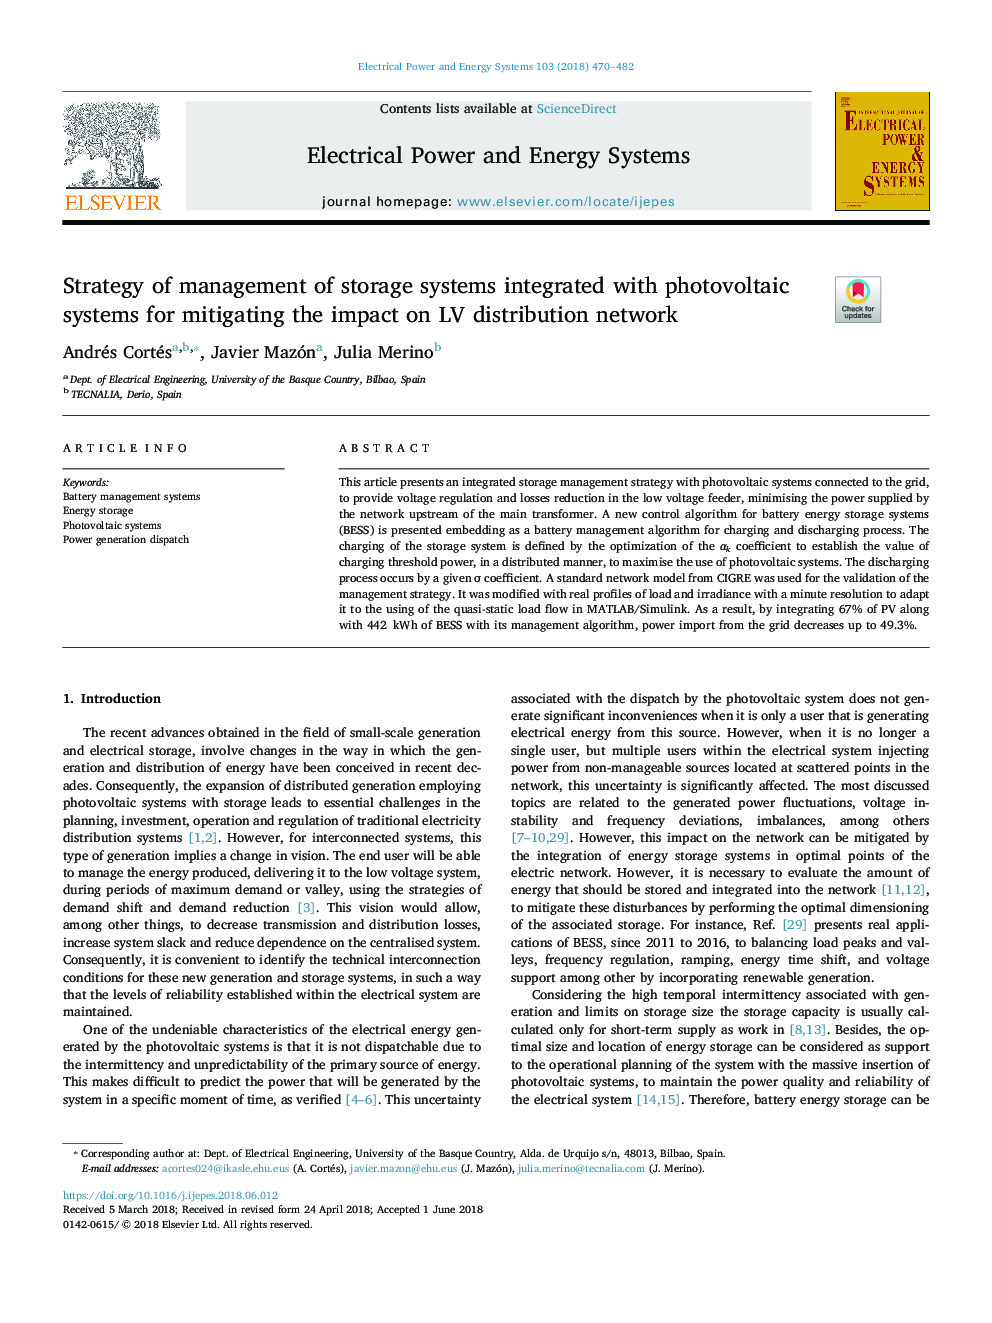 Strategy of management of storage systems integrated with photovoltaic systems for mitigating the impact on LV distribution network